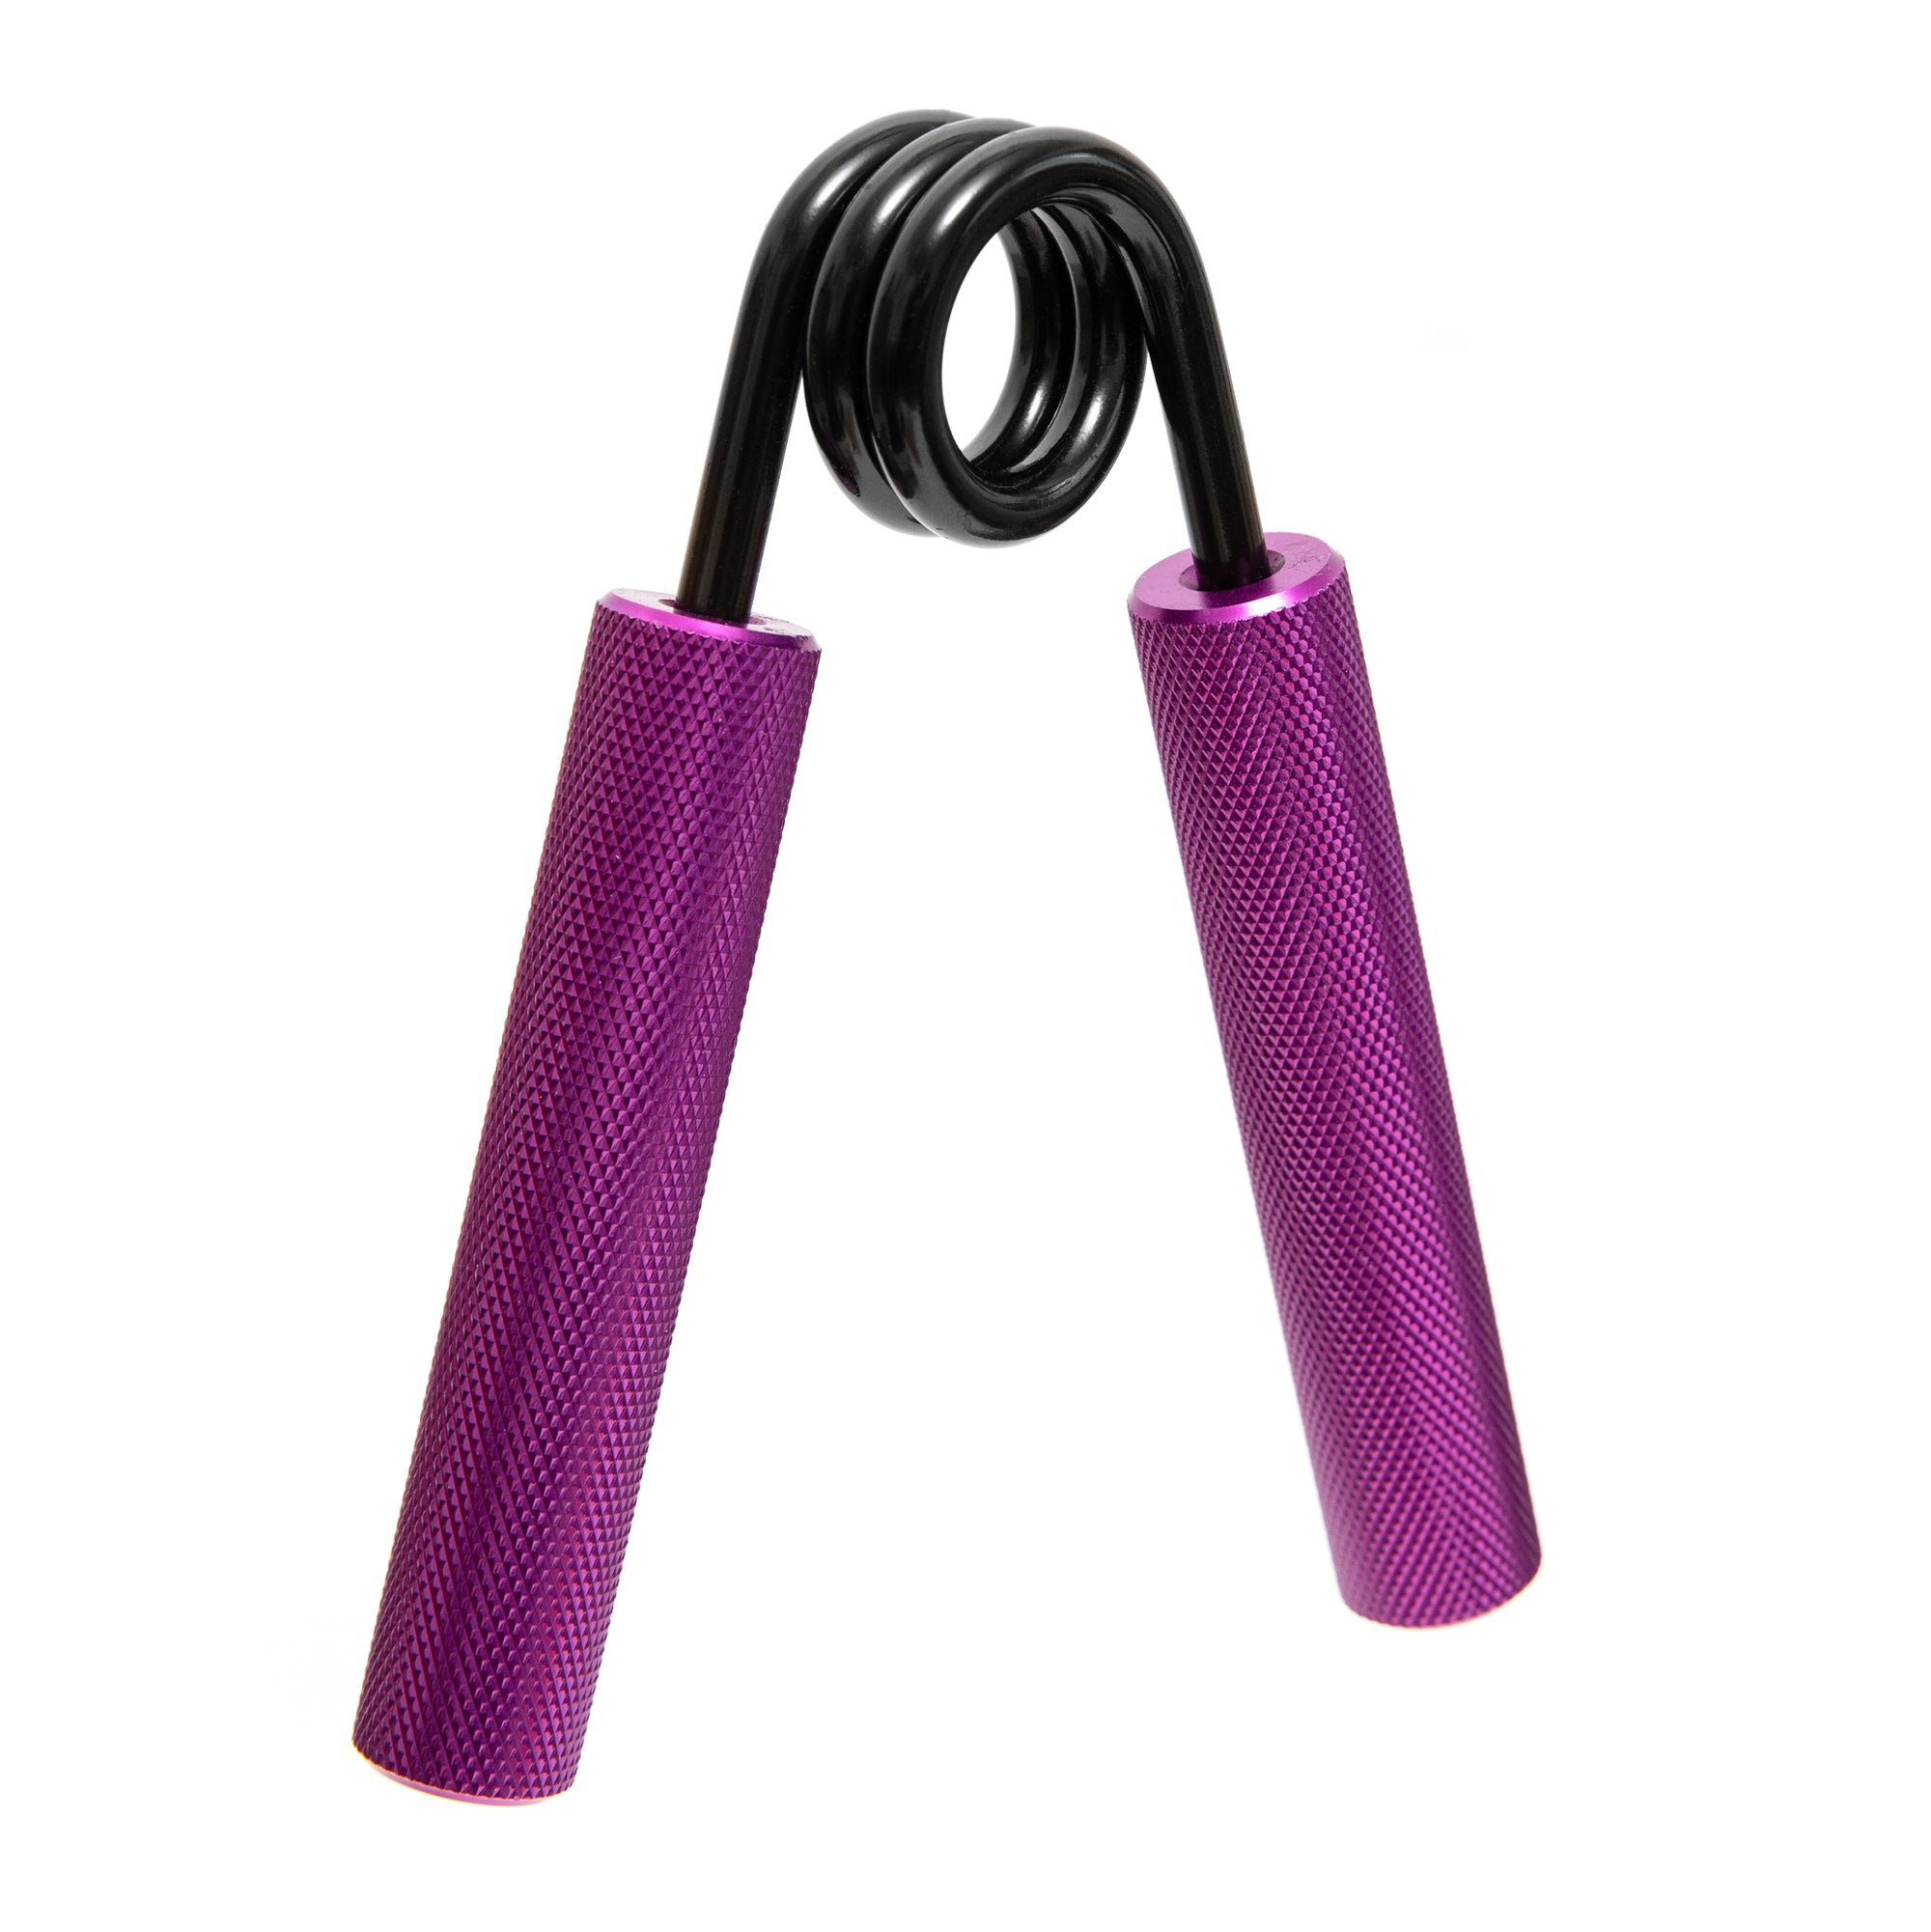 Gravity Fitness "Warrior Grip" Trainers 50LB - 350LB